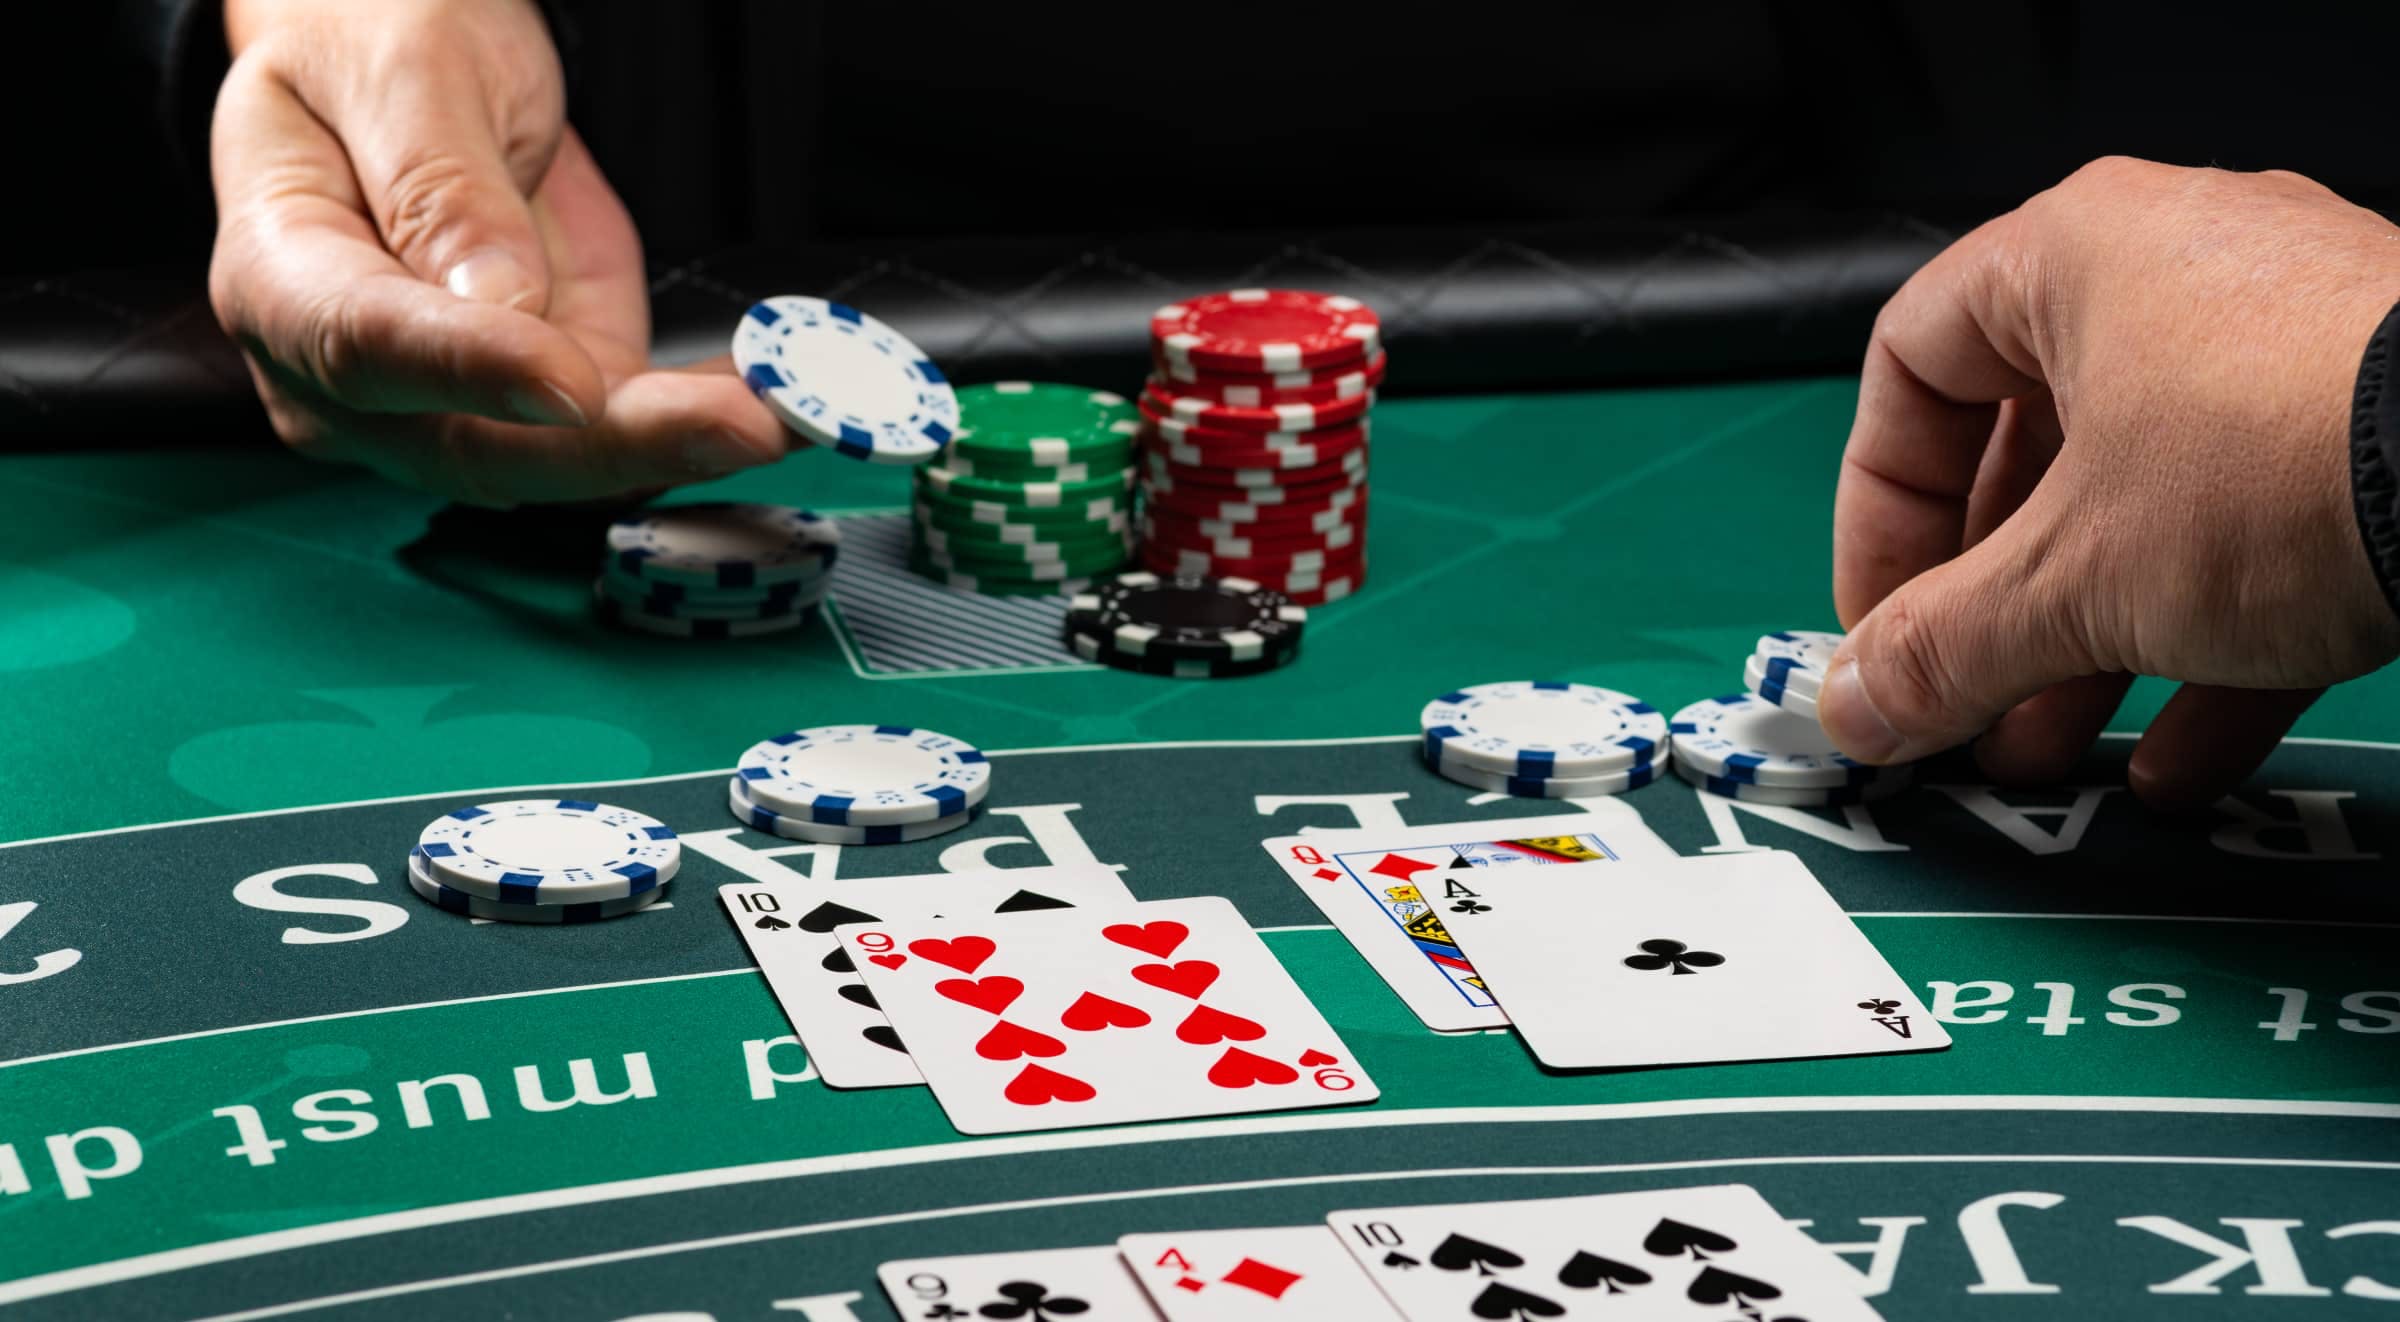 Blackjack for Fun: Enjoying the Game without the Pressure